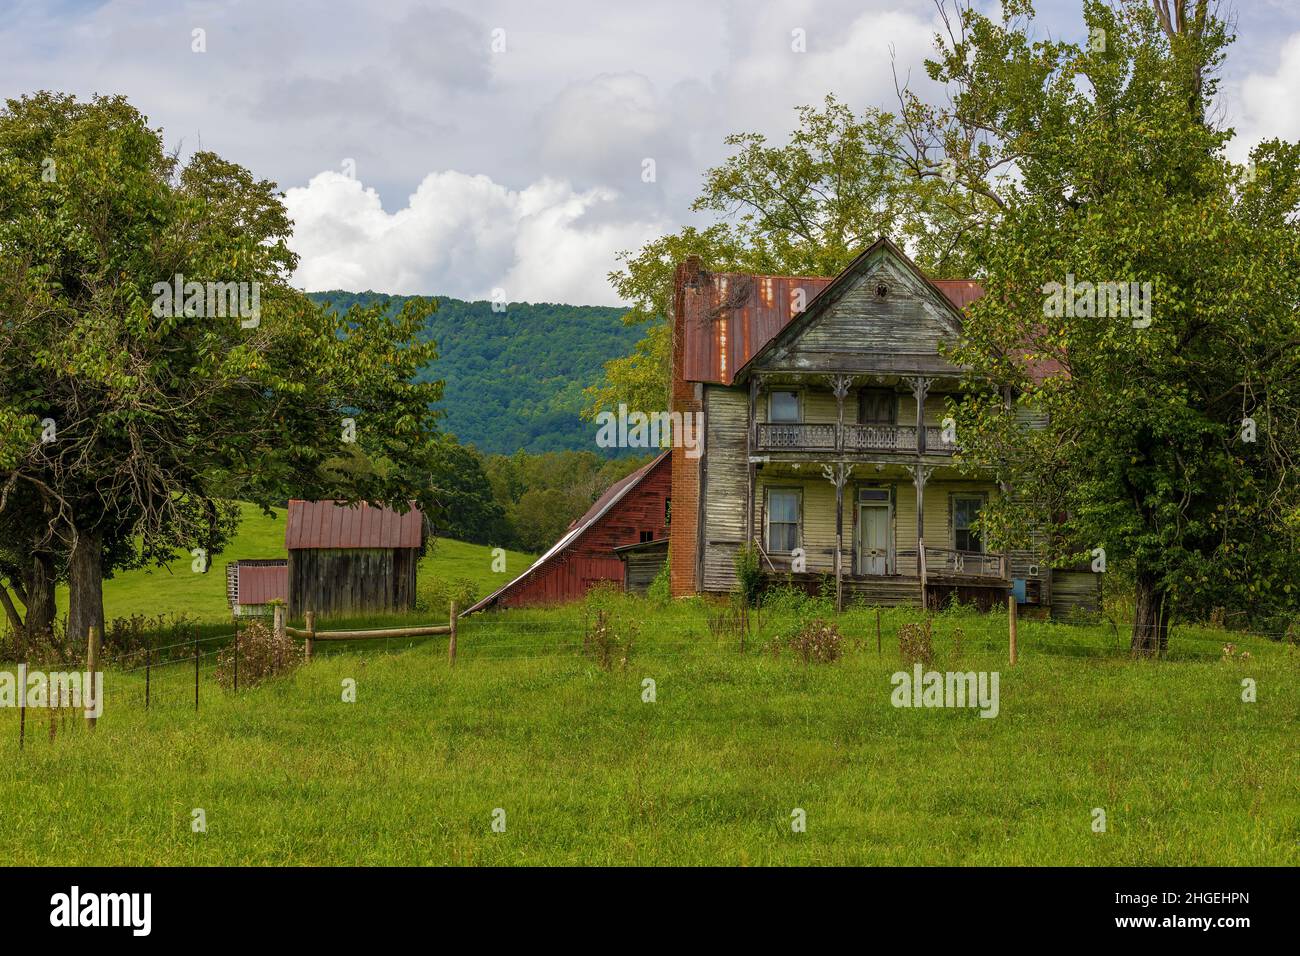 Granger County, Tennessee, USA - Autust 29, 2021: Original a log cabin build in 1848 for the James Walker family and was updated to its design today a Stock Photo